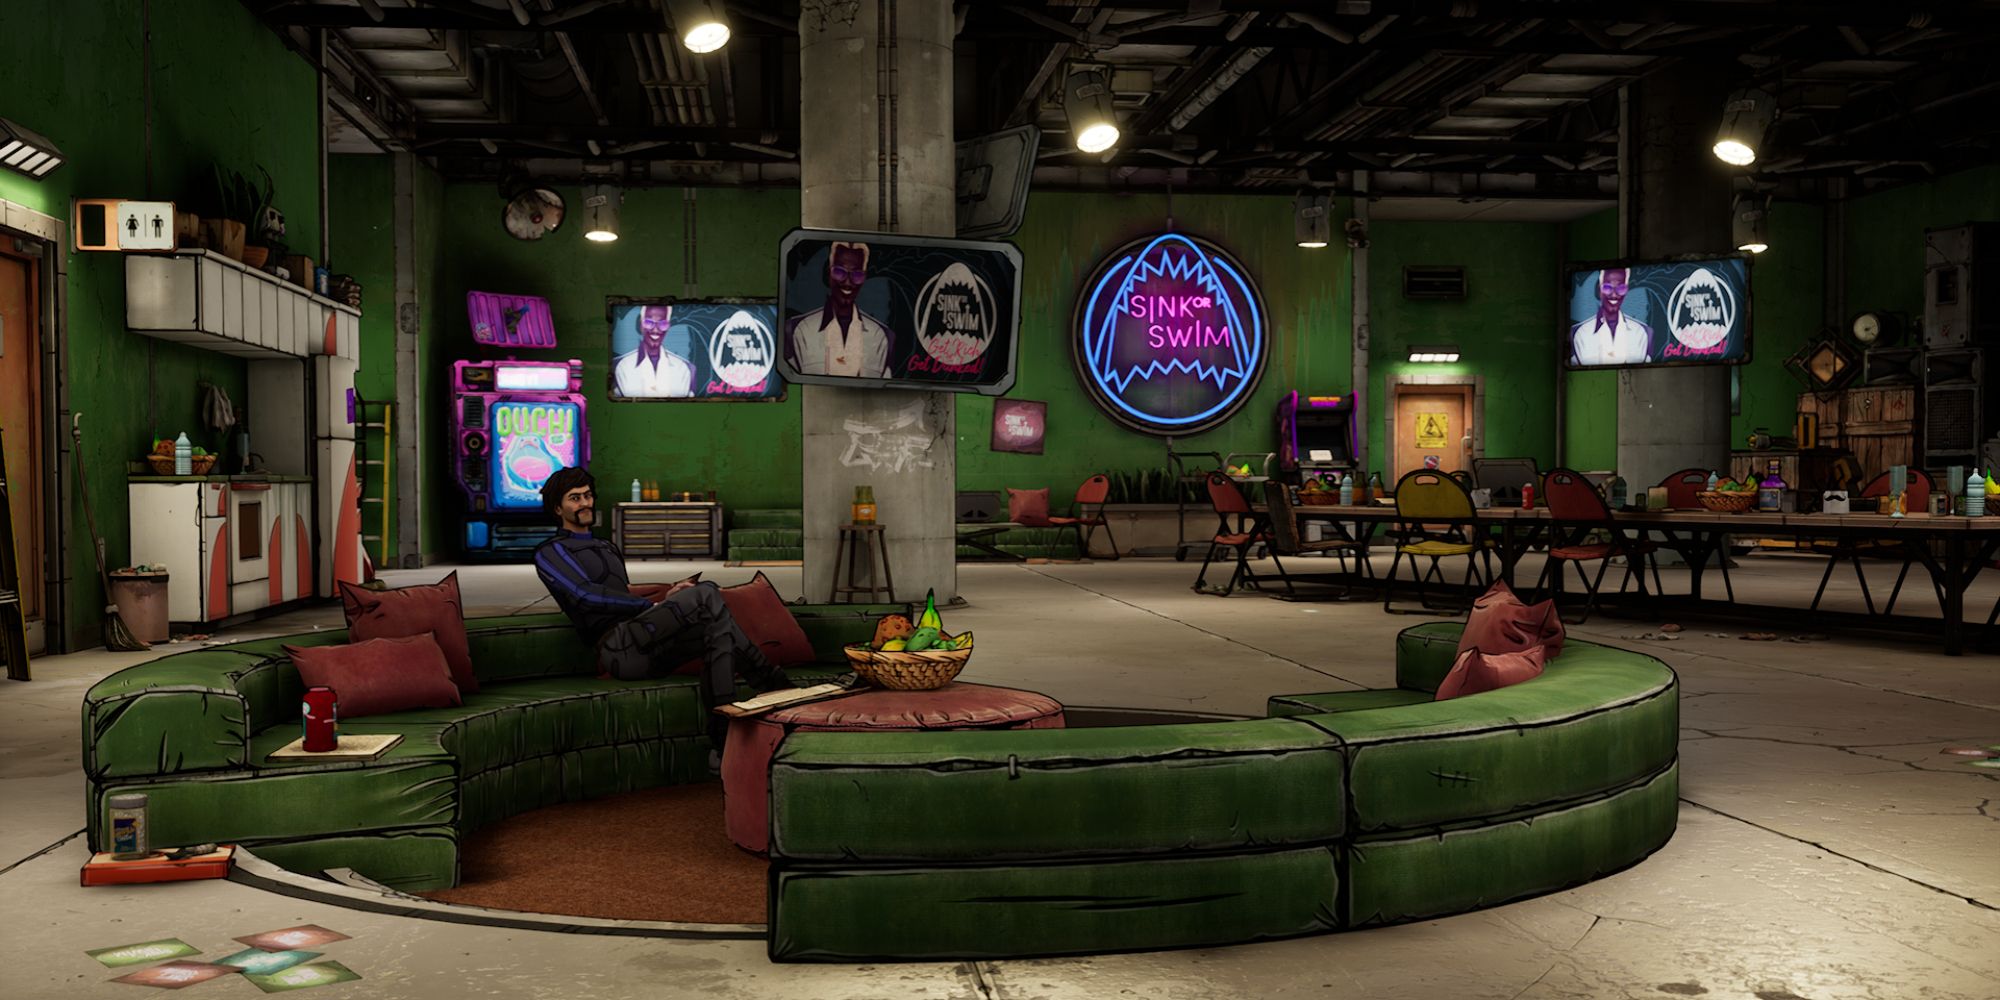 New Tales From The Borderlands Screenshot Of Sink Or Swim Greenroom